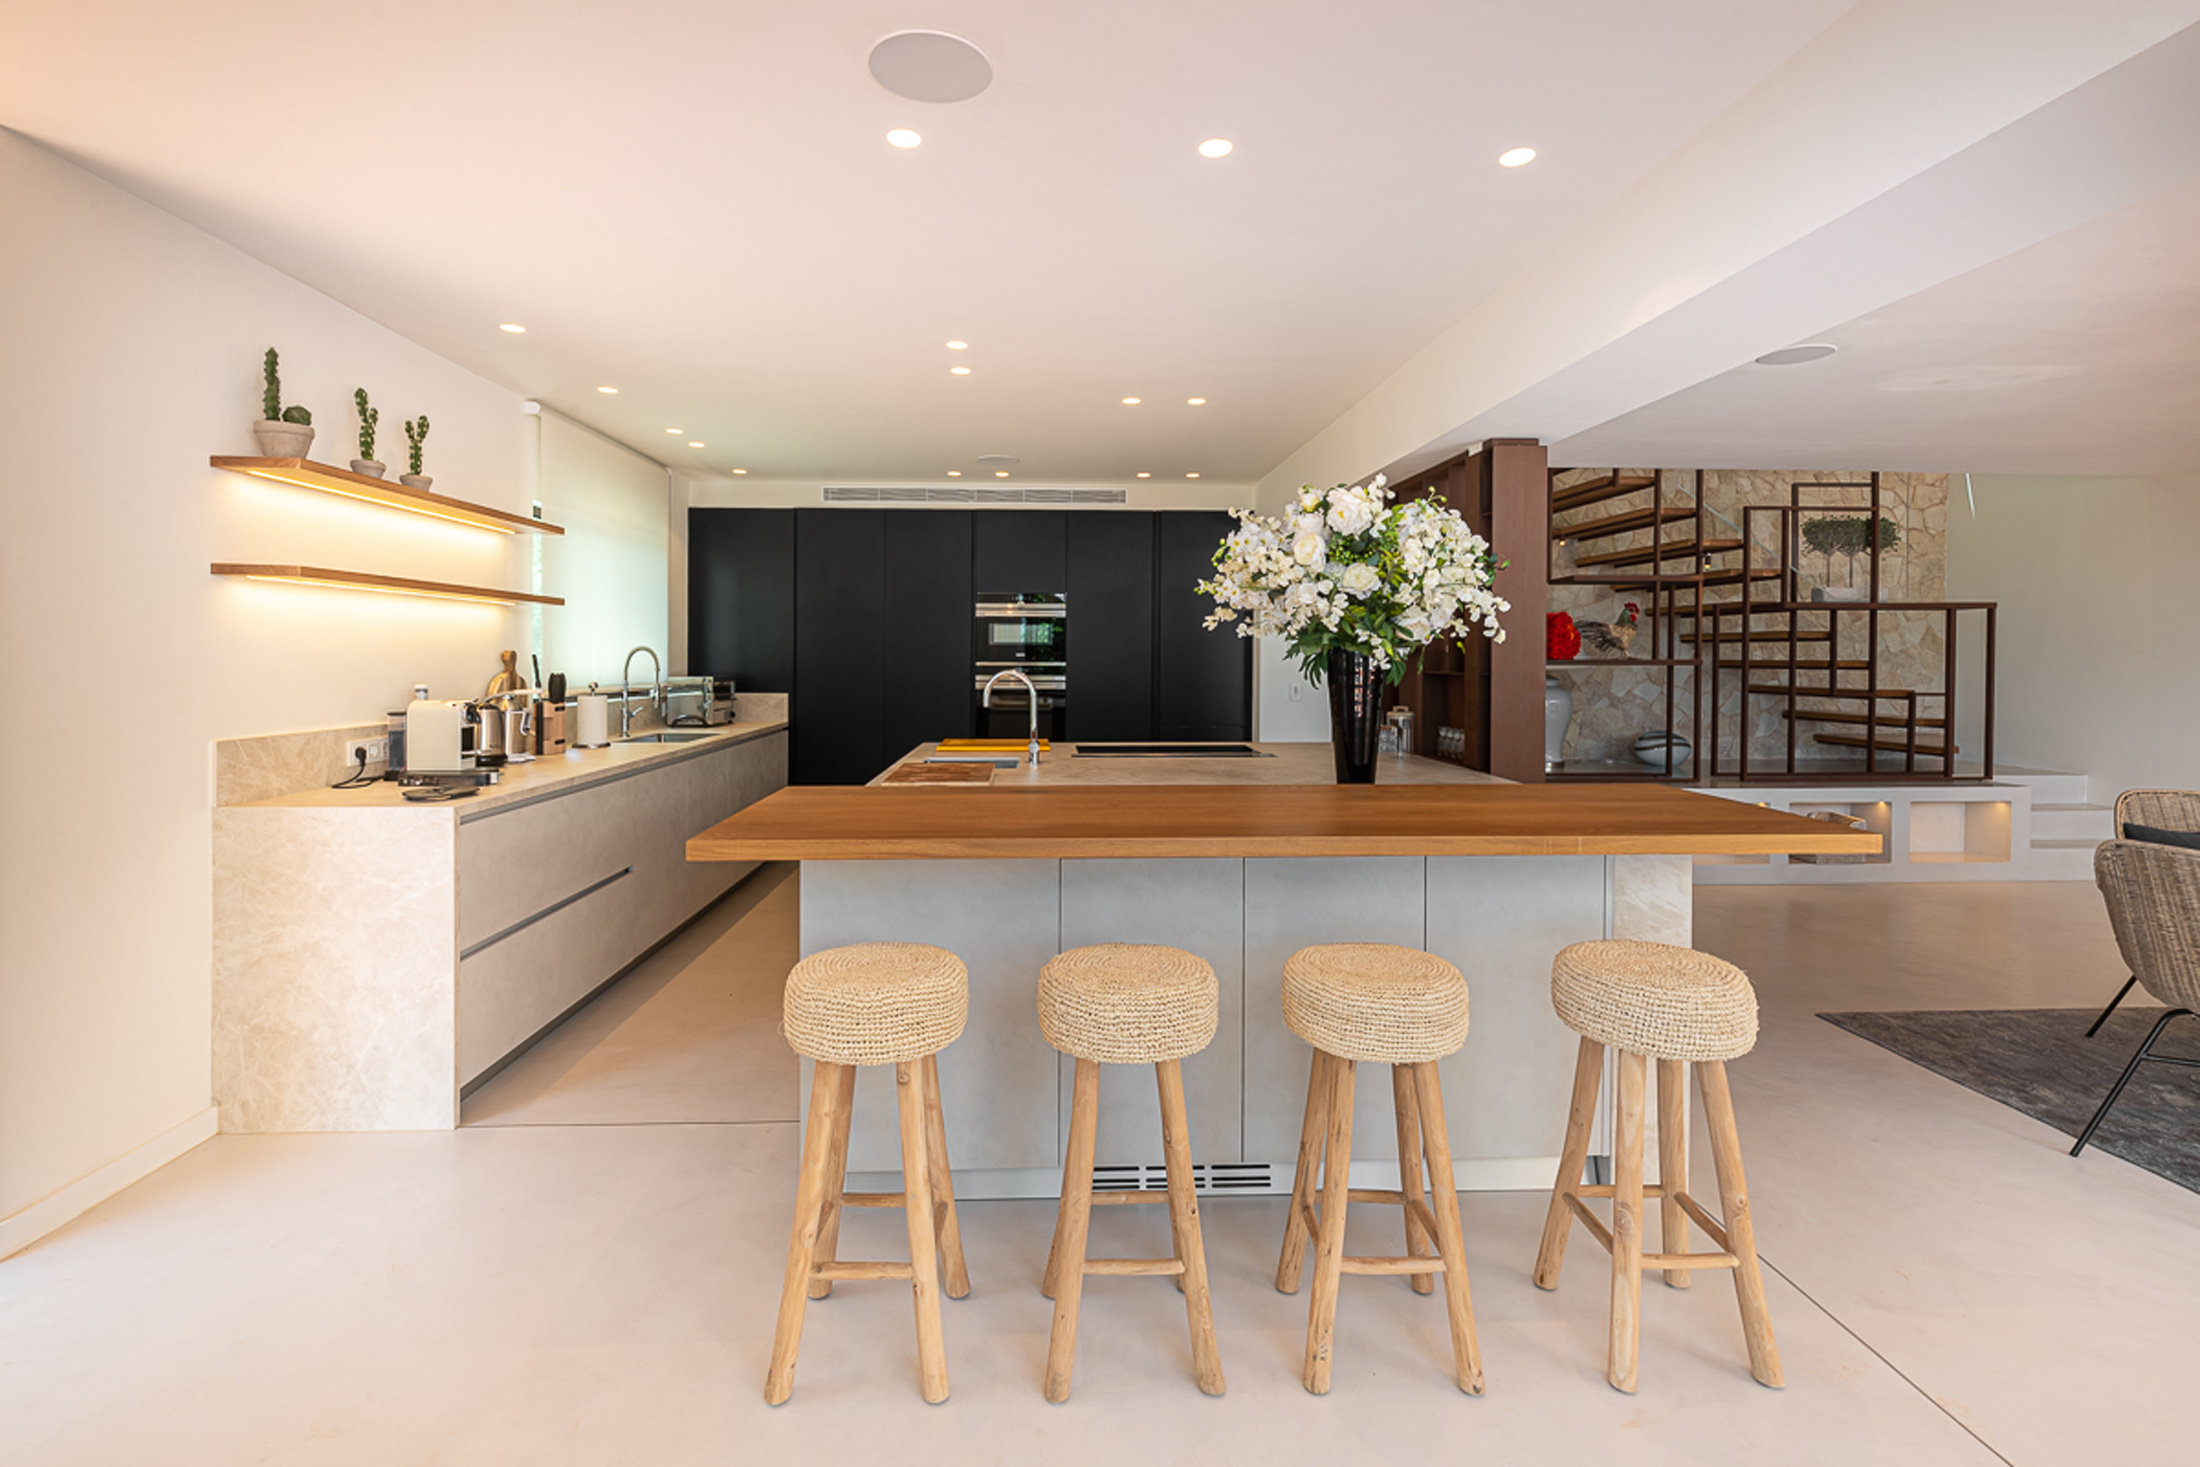 Kitchen and breakfast bar backdropped by a navy accent wall in a luxury Ibizan villa